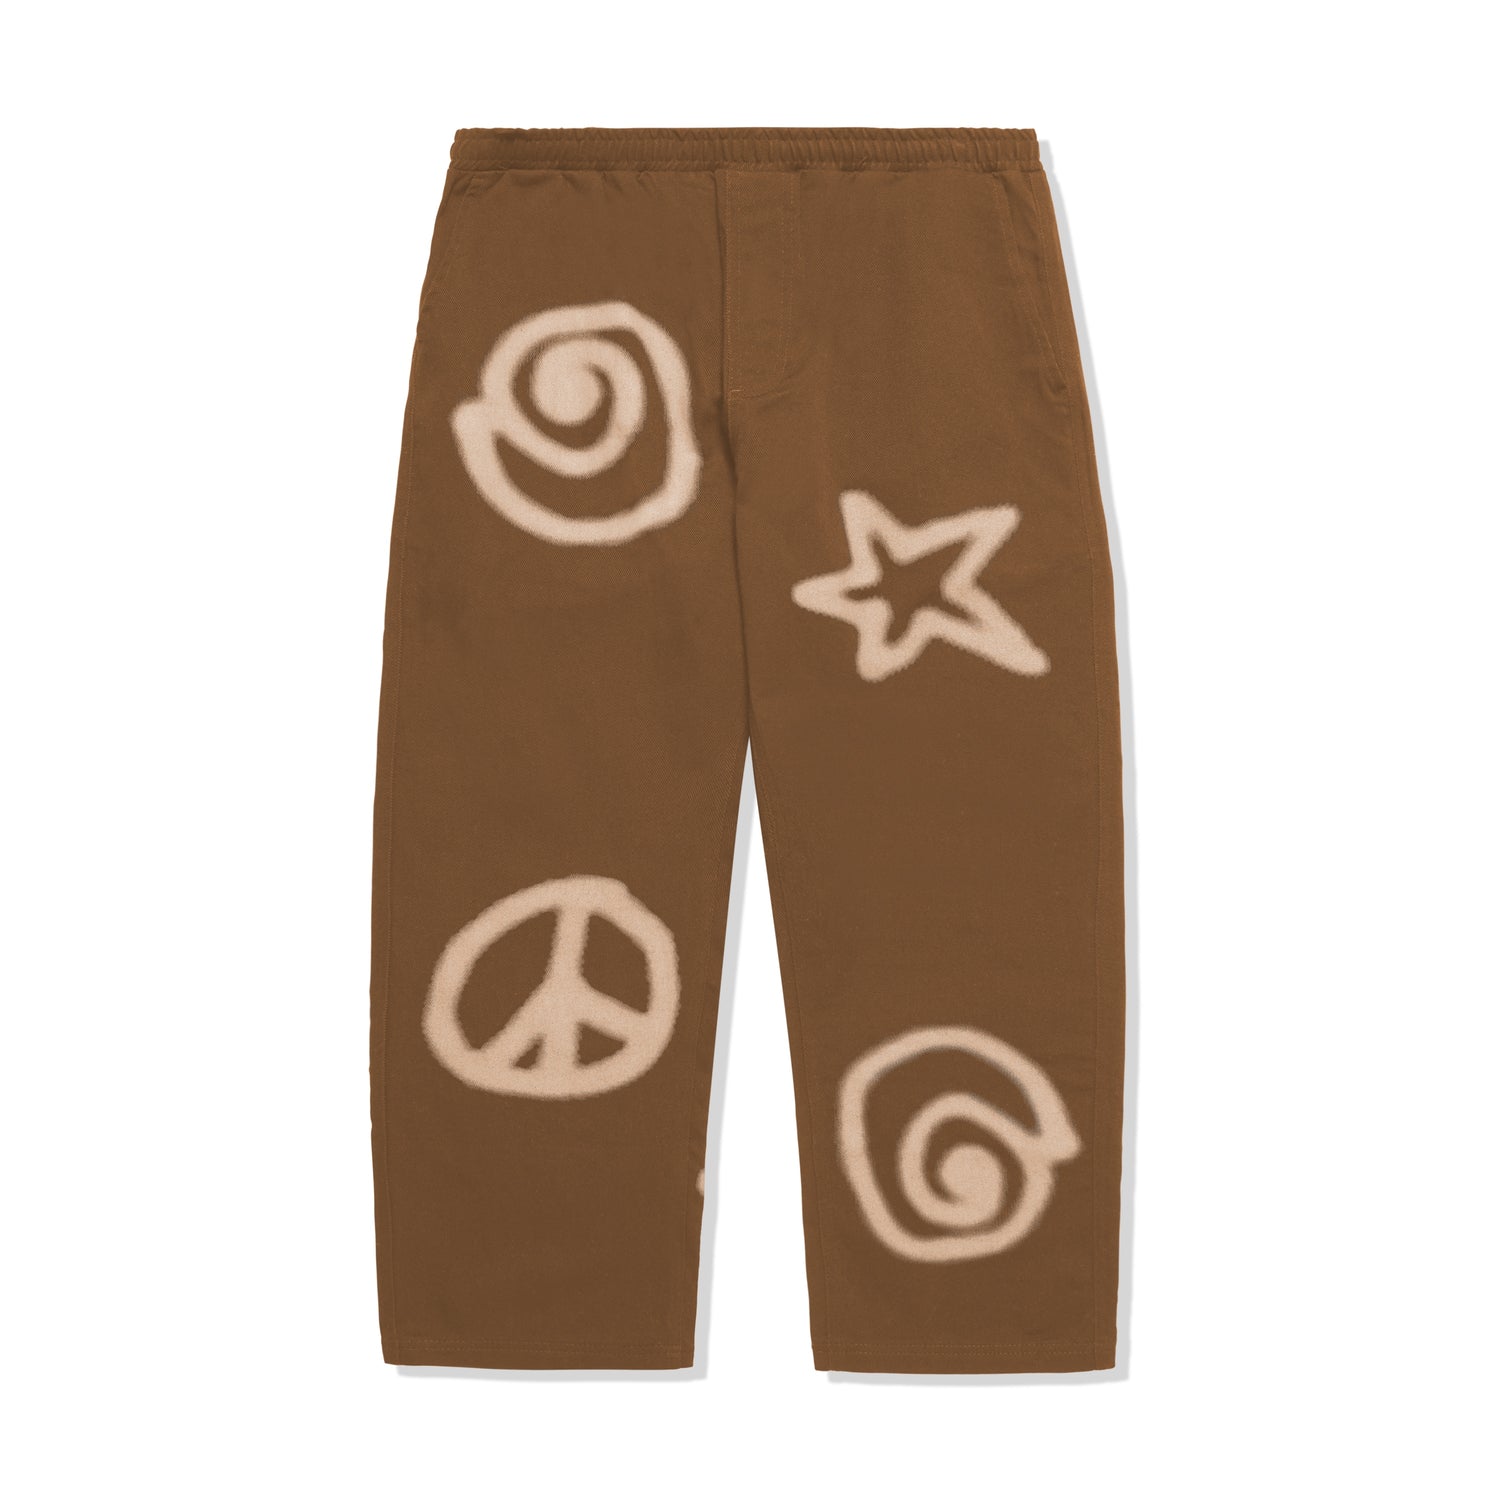 Shapes All Over Pants, Brown